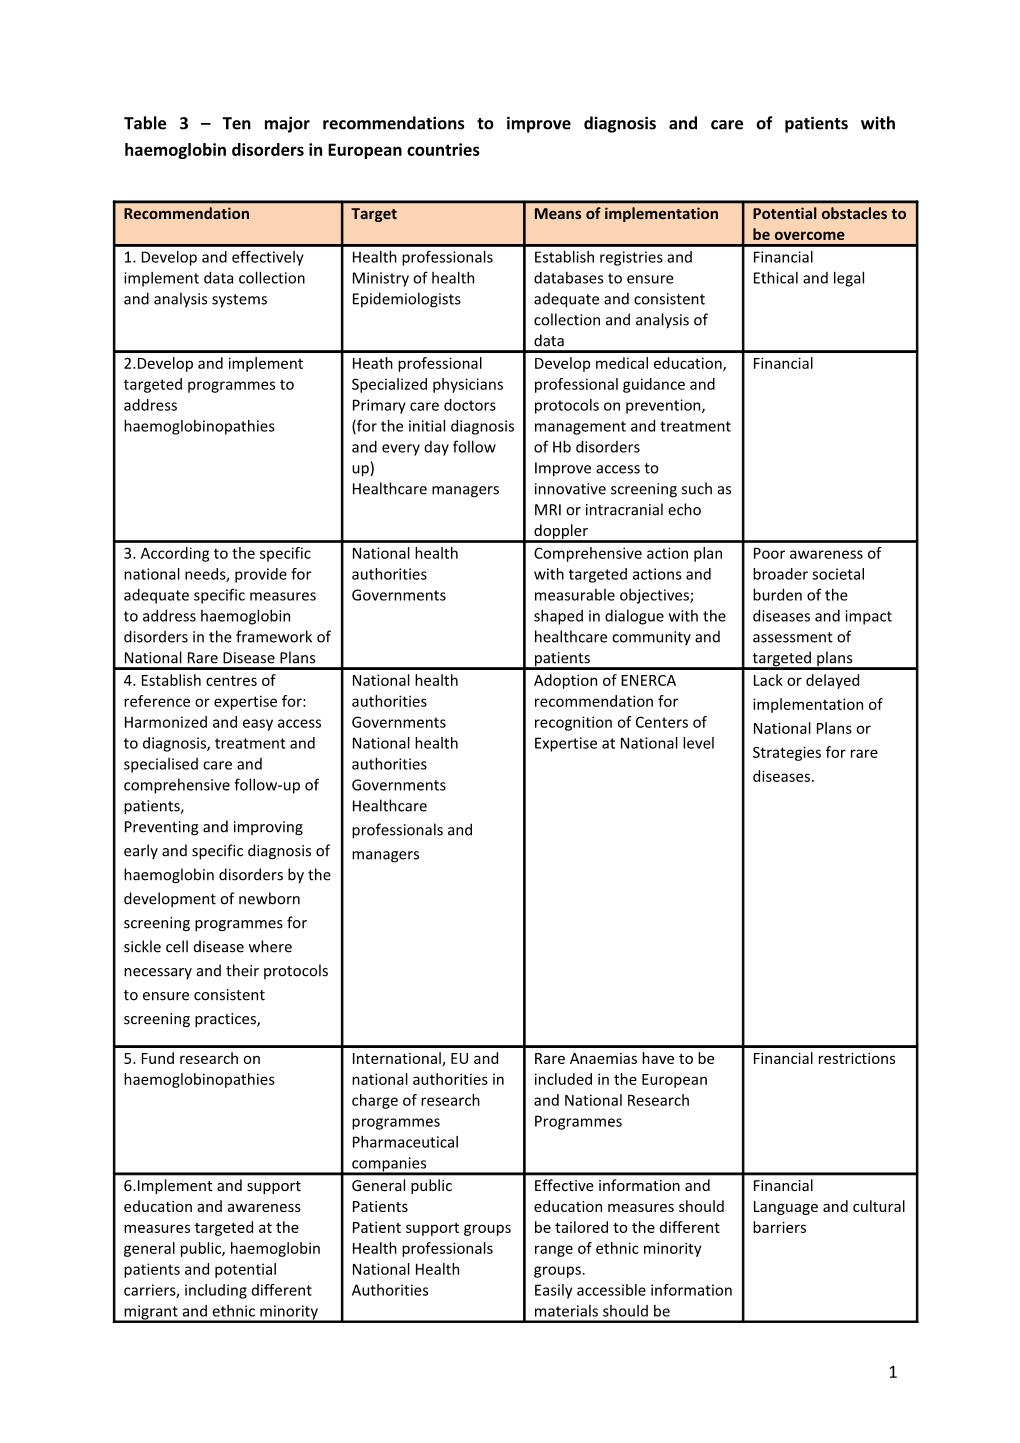 Table 3 Ten Major Recommendations to Improve Diagnosis and Care of Patients with Haemoglobin